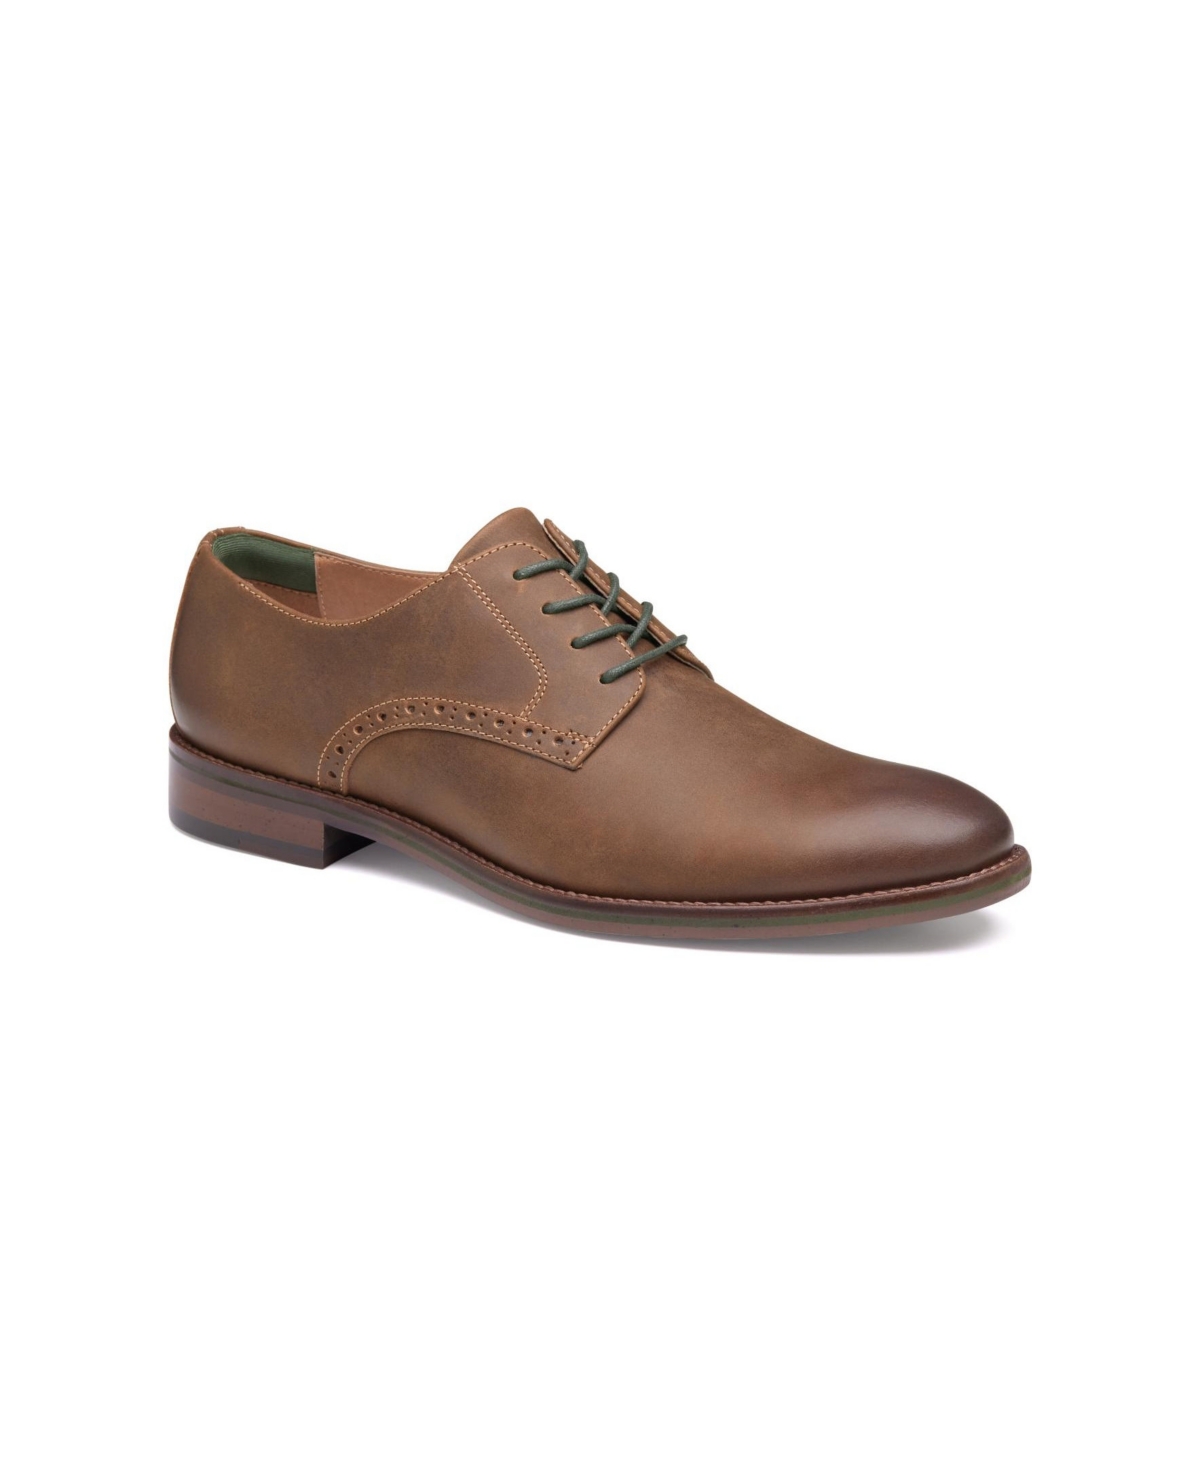 Johnston & Murphy Men's Conard 2.0 Leather Plain Toe Shoes In Tan Oiled Leather